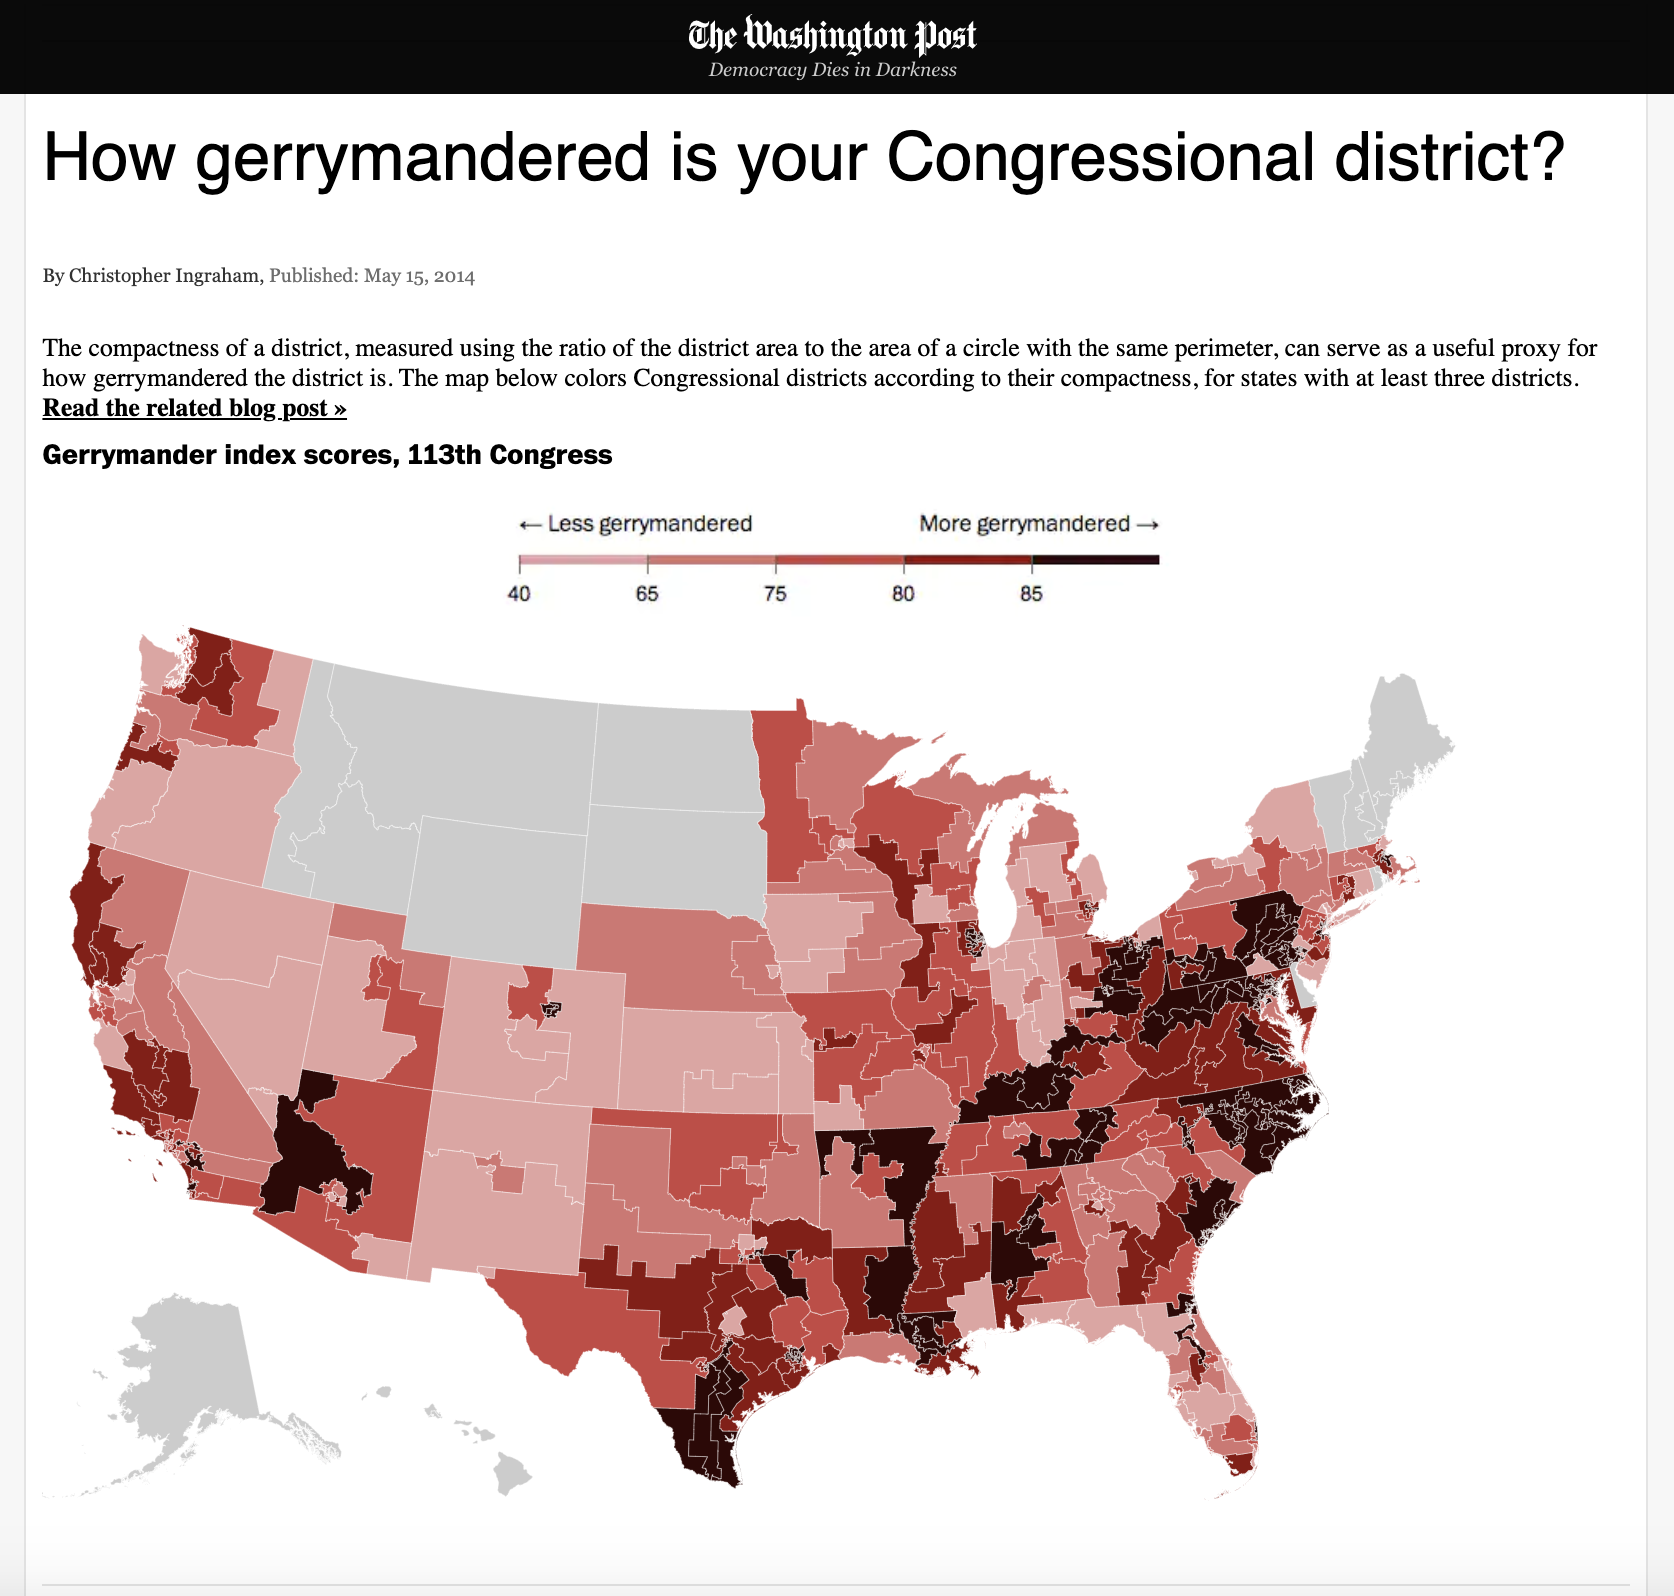 The compactness of a district, measured using the ratio of the district area to the area of a circle with the same perimeter, can serve as a useful proxy for how gerrymandered the district is. The map below colors Congressional districts according to their compactness, for states with at least three districts.